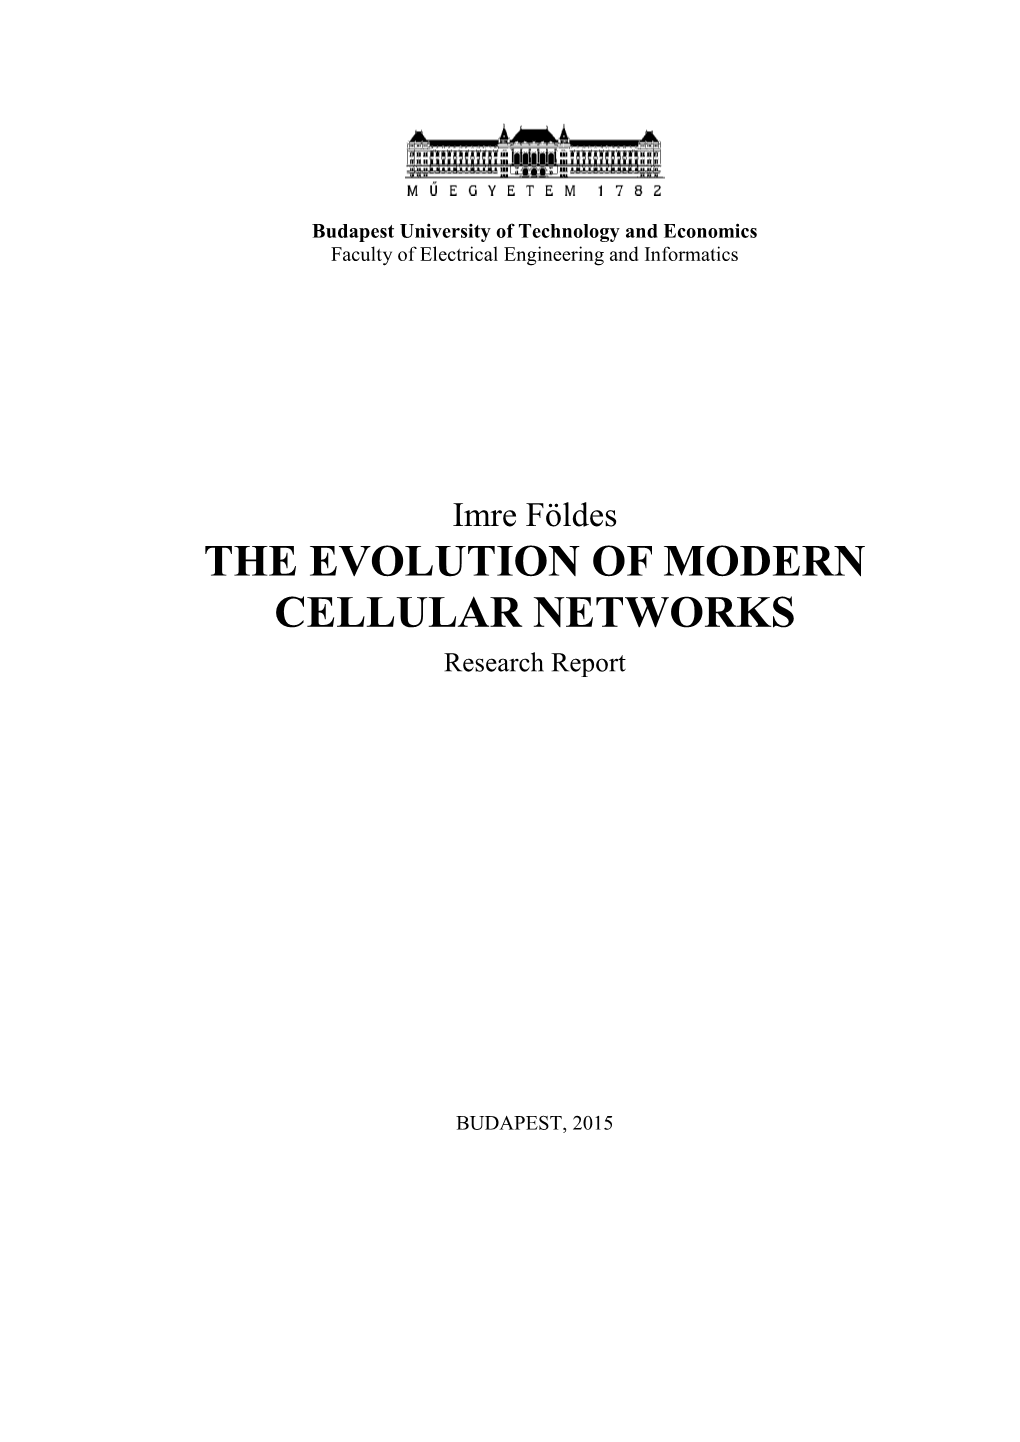 THE EVOLUTION of MODERN CELLULAR NETWORKS Research Report